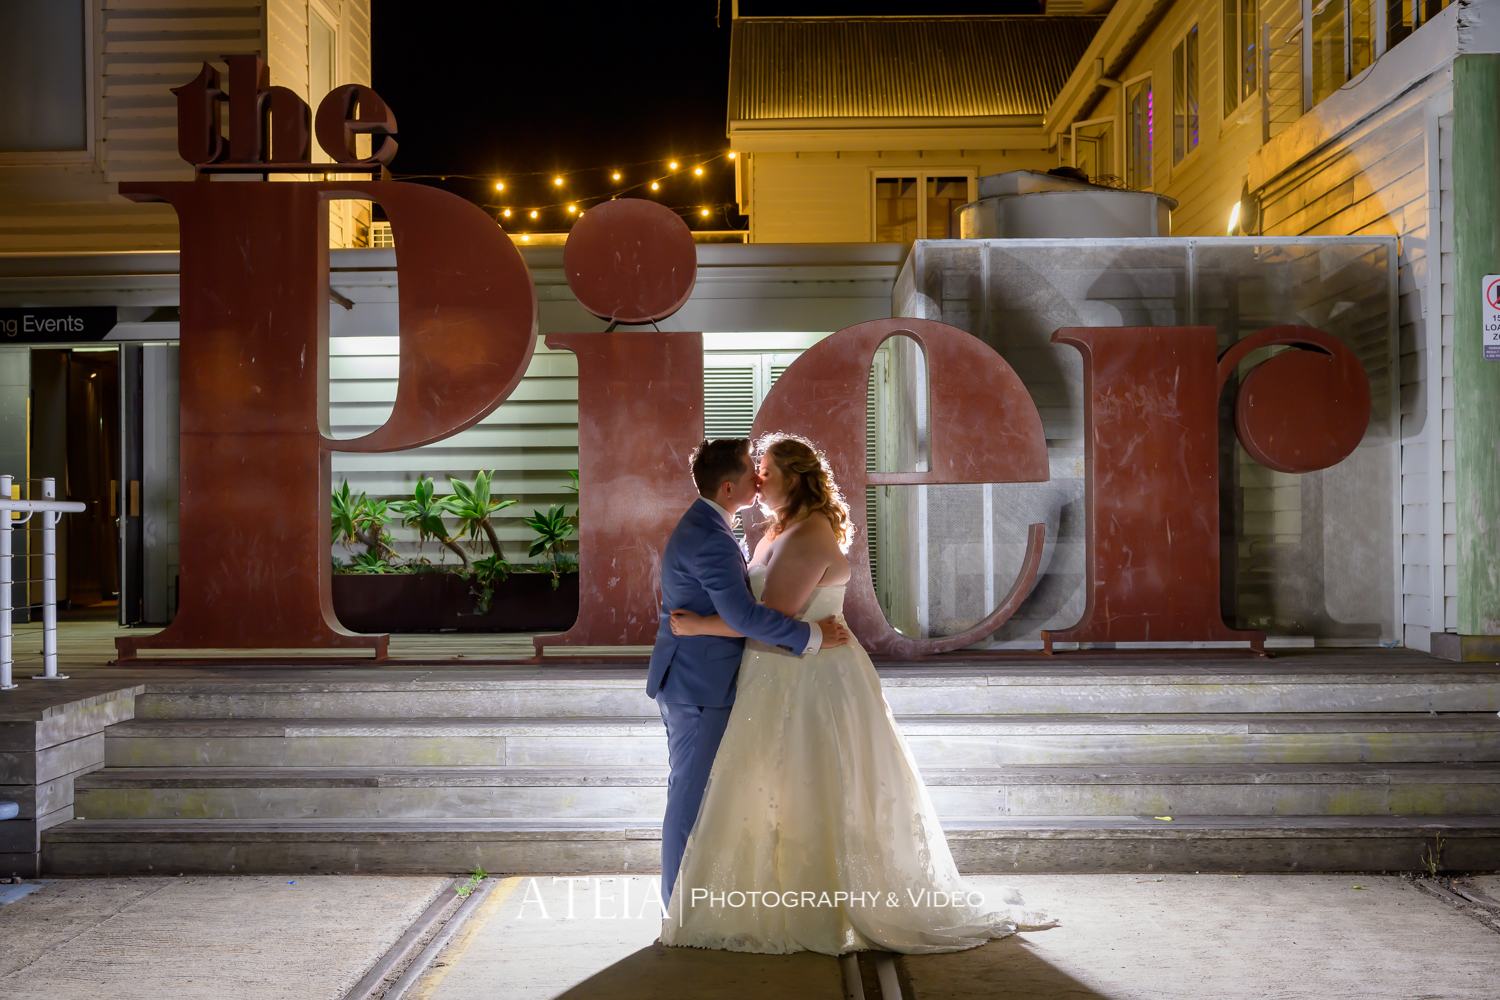 , Emily and Thomas&#8217; wedding photography at The Pier Geelong captured by ATEIA Photography &#038; Video